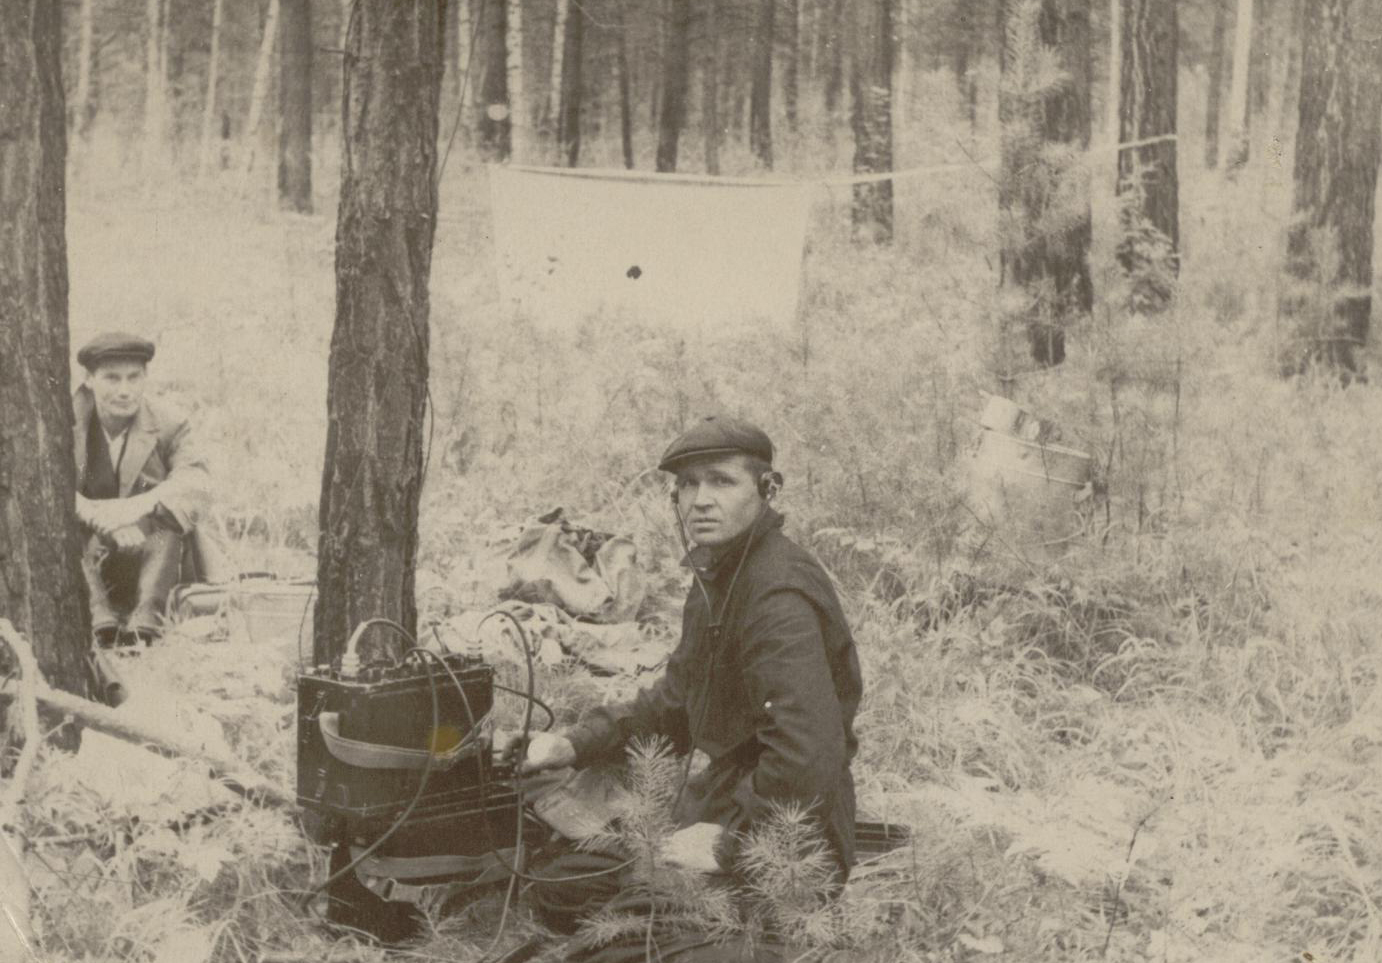 Archival photo; man sitting in the forest, looking at the photographer